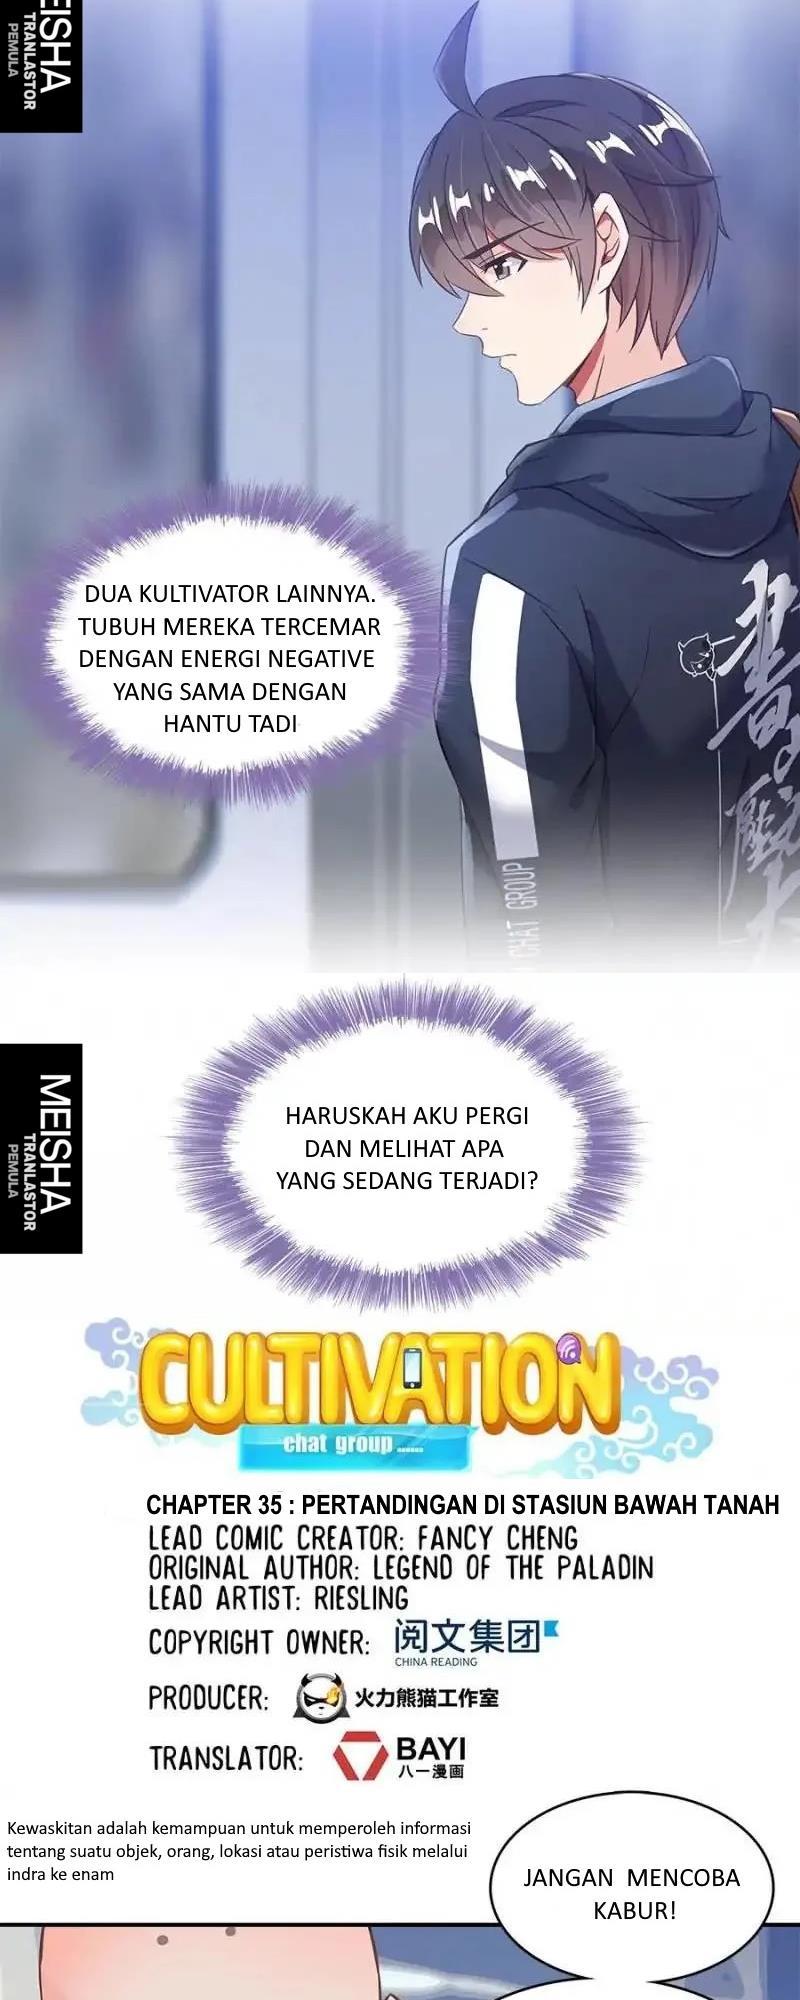 Cultivation Chat Group Chapter 35